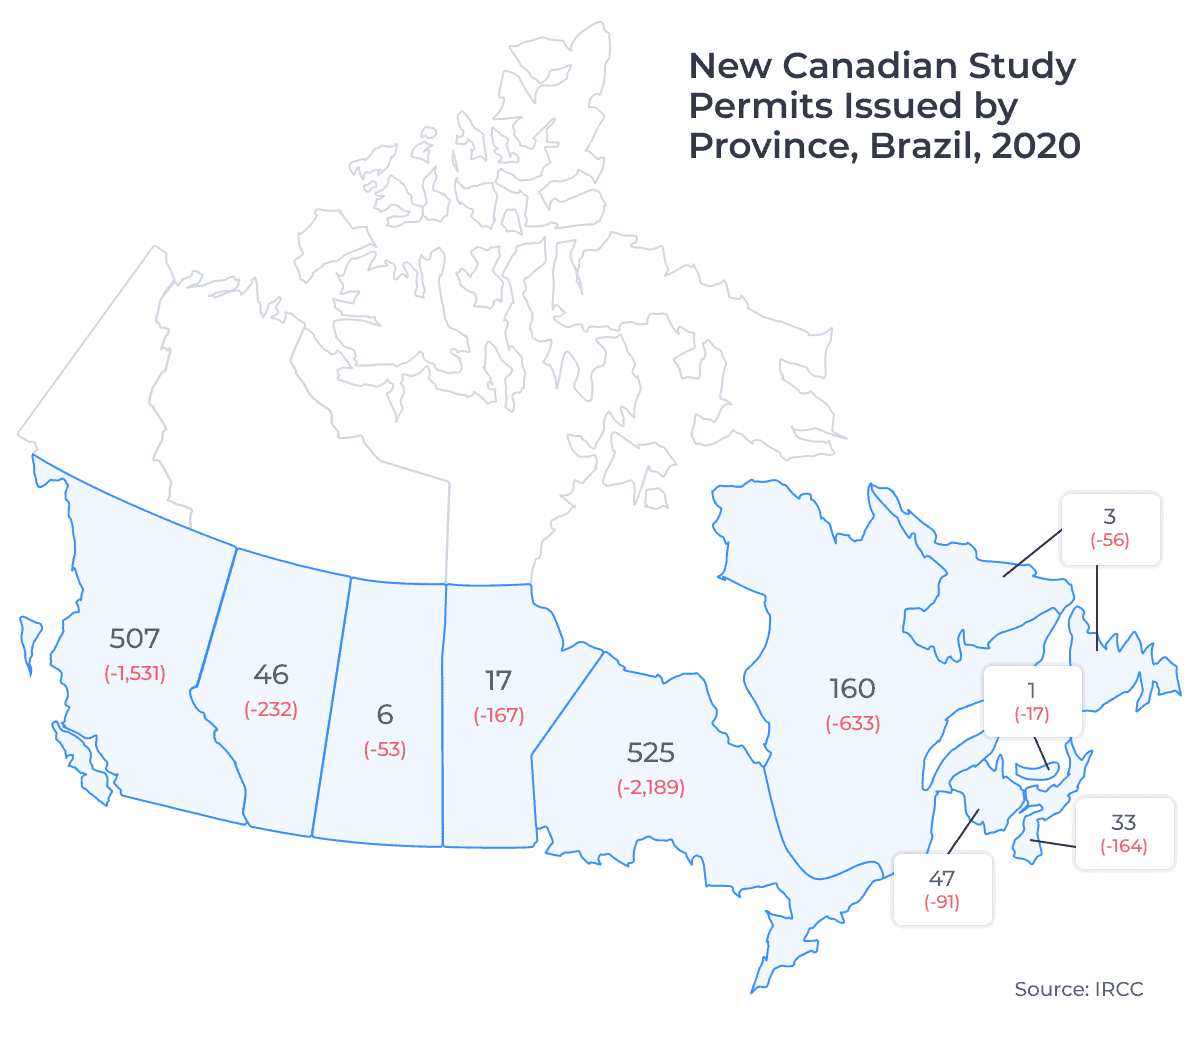 New Canadian Study Permits Issued by Province, Brazil, 2020